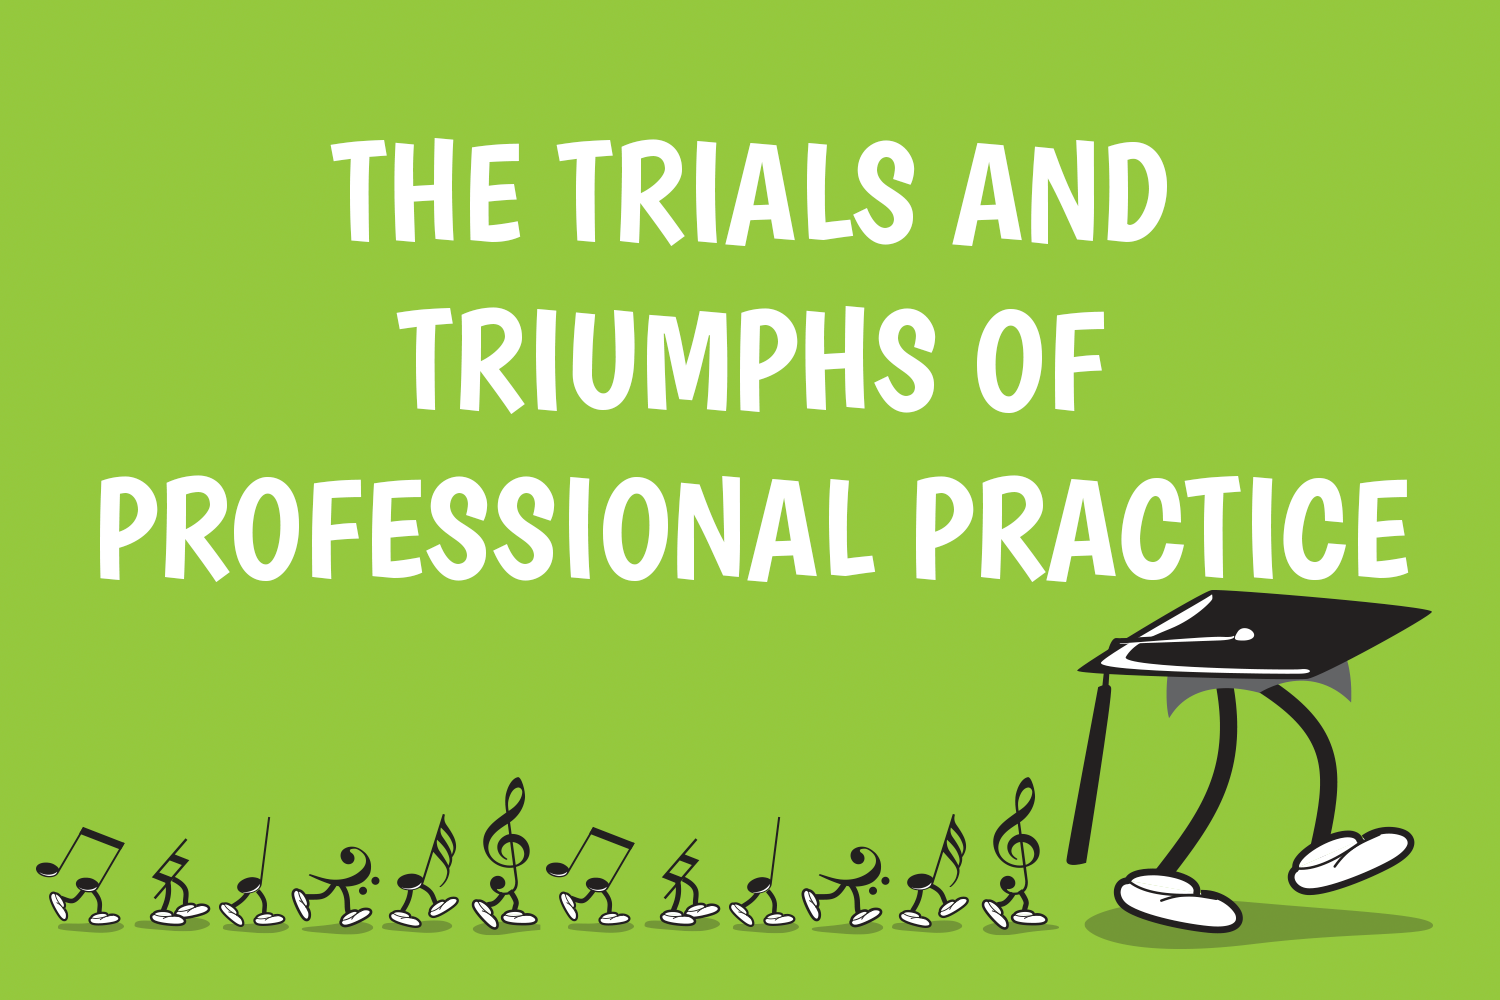 The trials and triumphs of professional practice